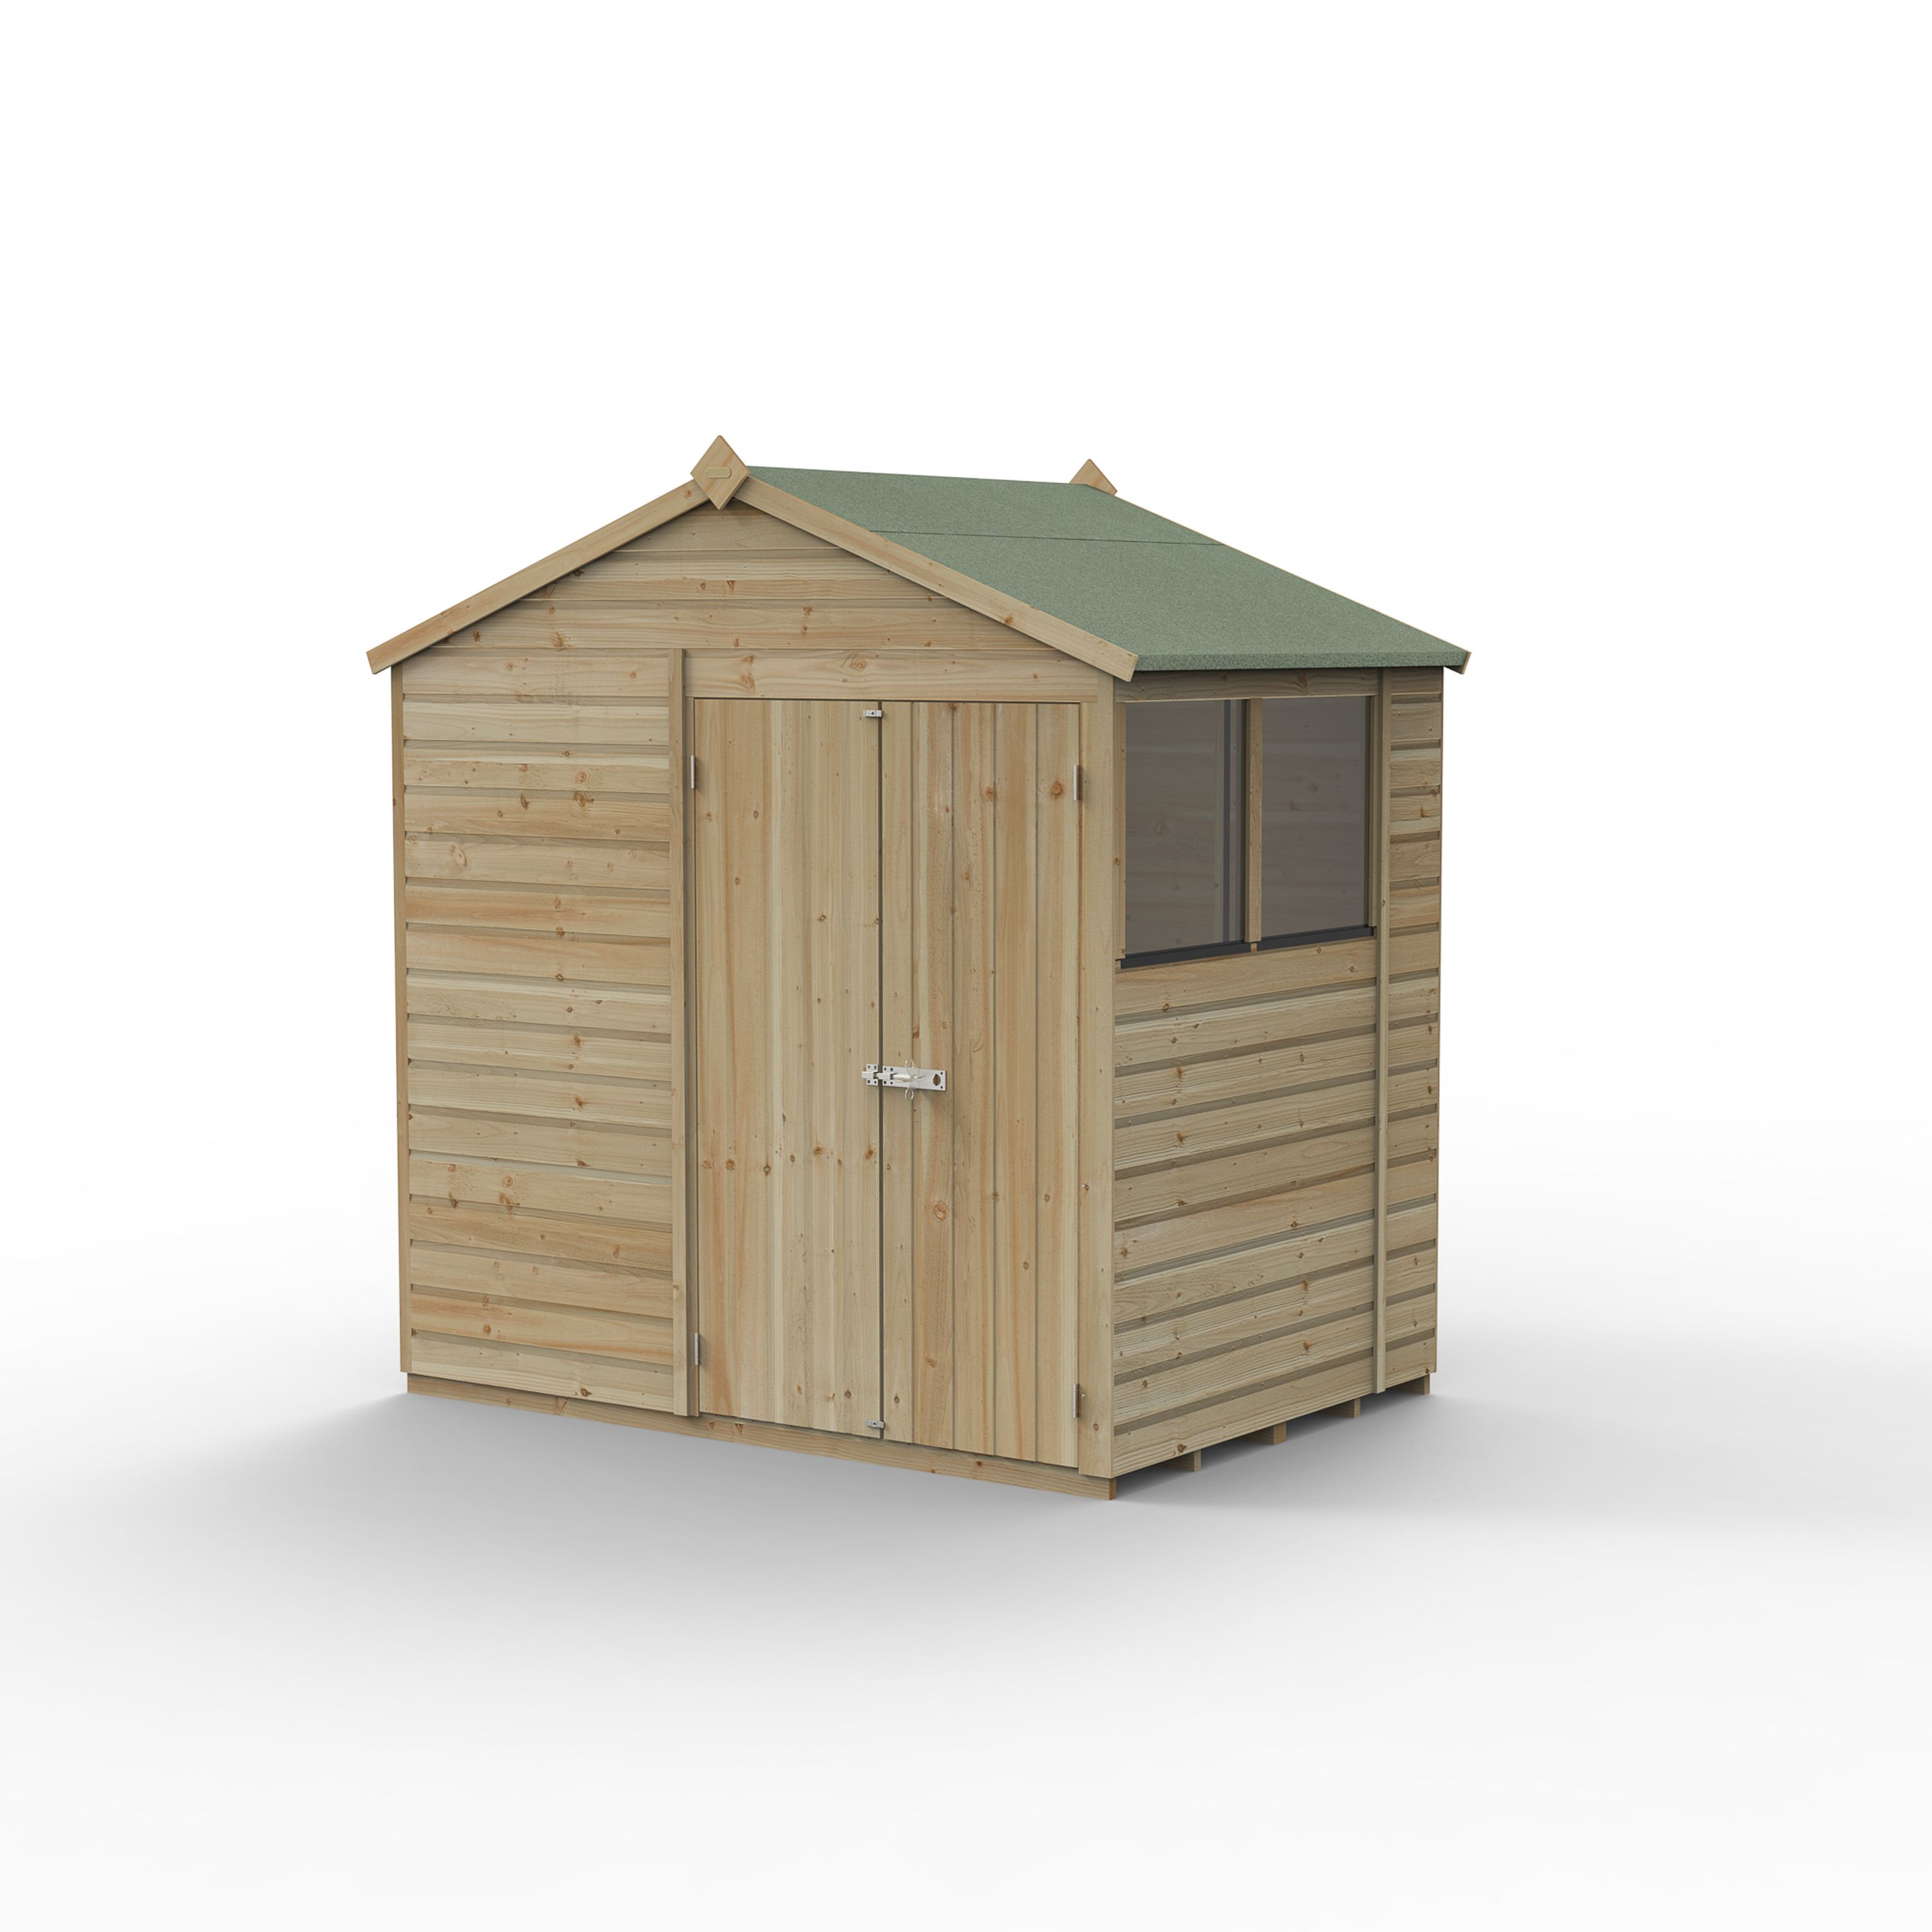 Forest Garden Beckwood 7x5 ft Pent Natural timber Wooden 2 door Shed with floor & 2 windows (Base included) - Assembly not required